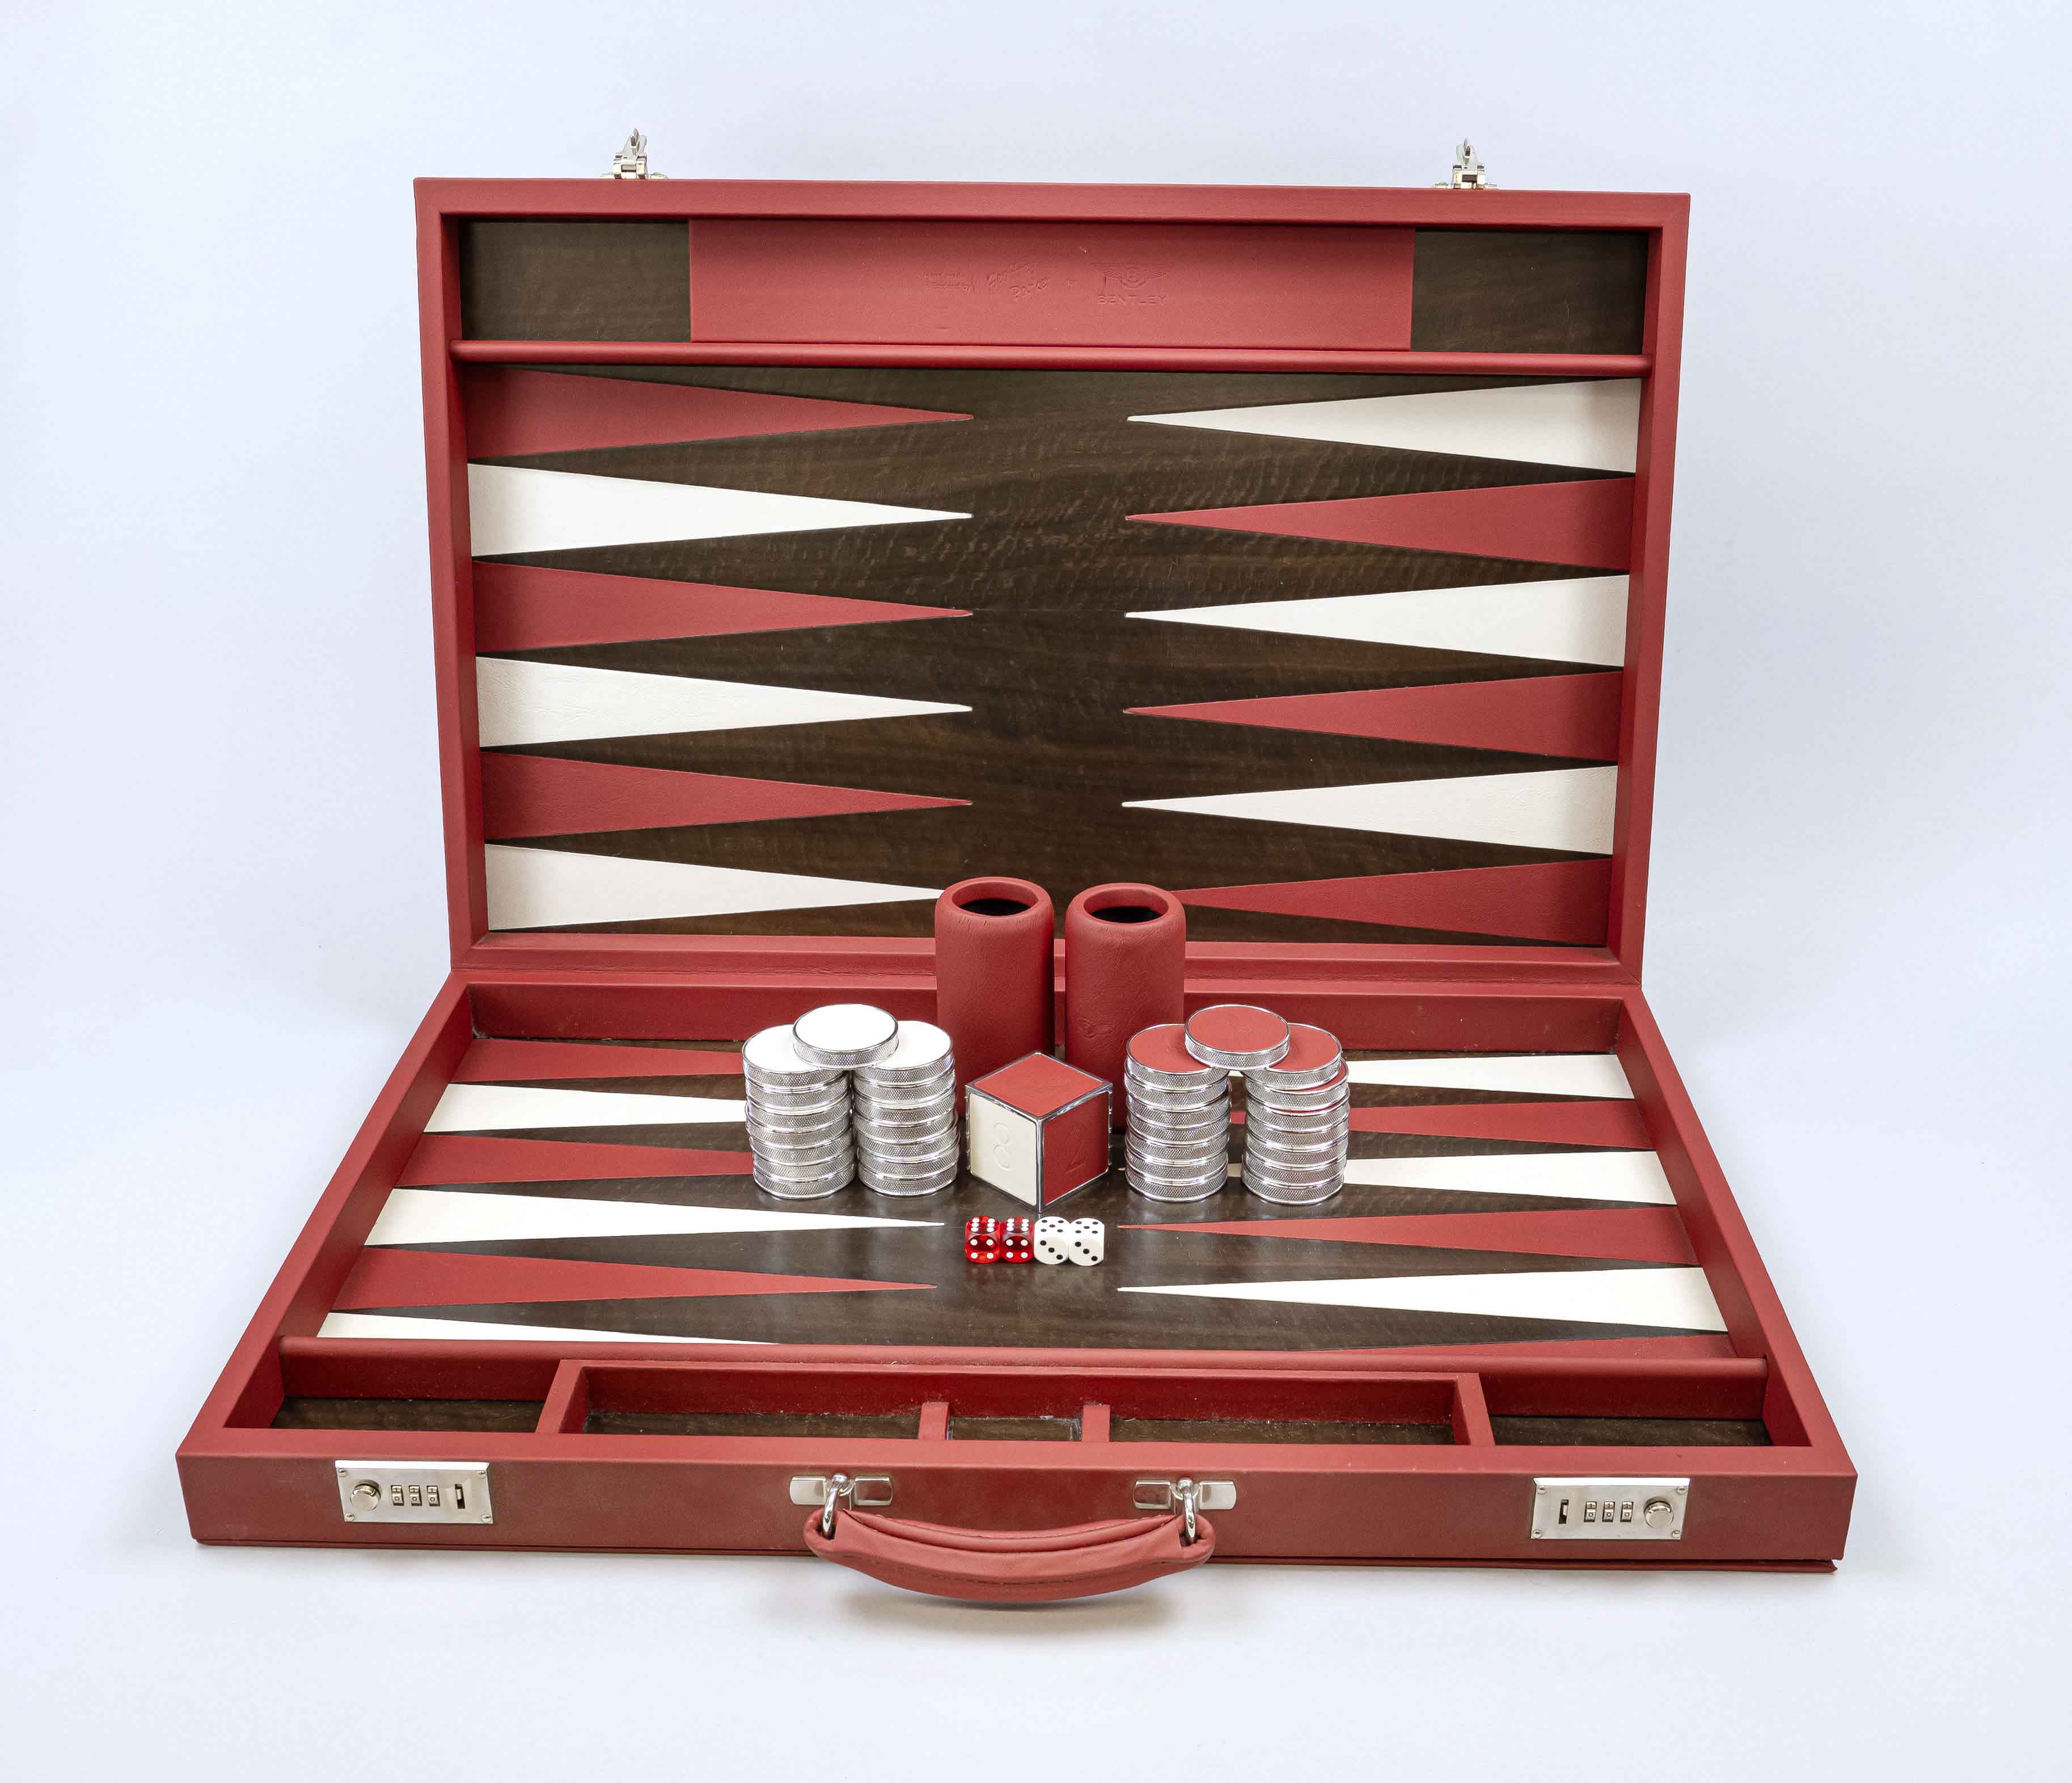 Bentley backgammon, 20th/21st century, red and white leather, red and white chips, dice cup...case